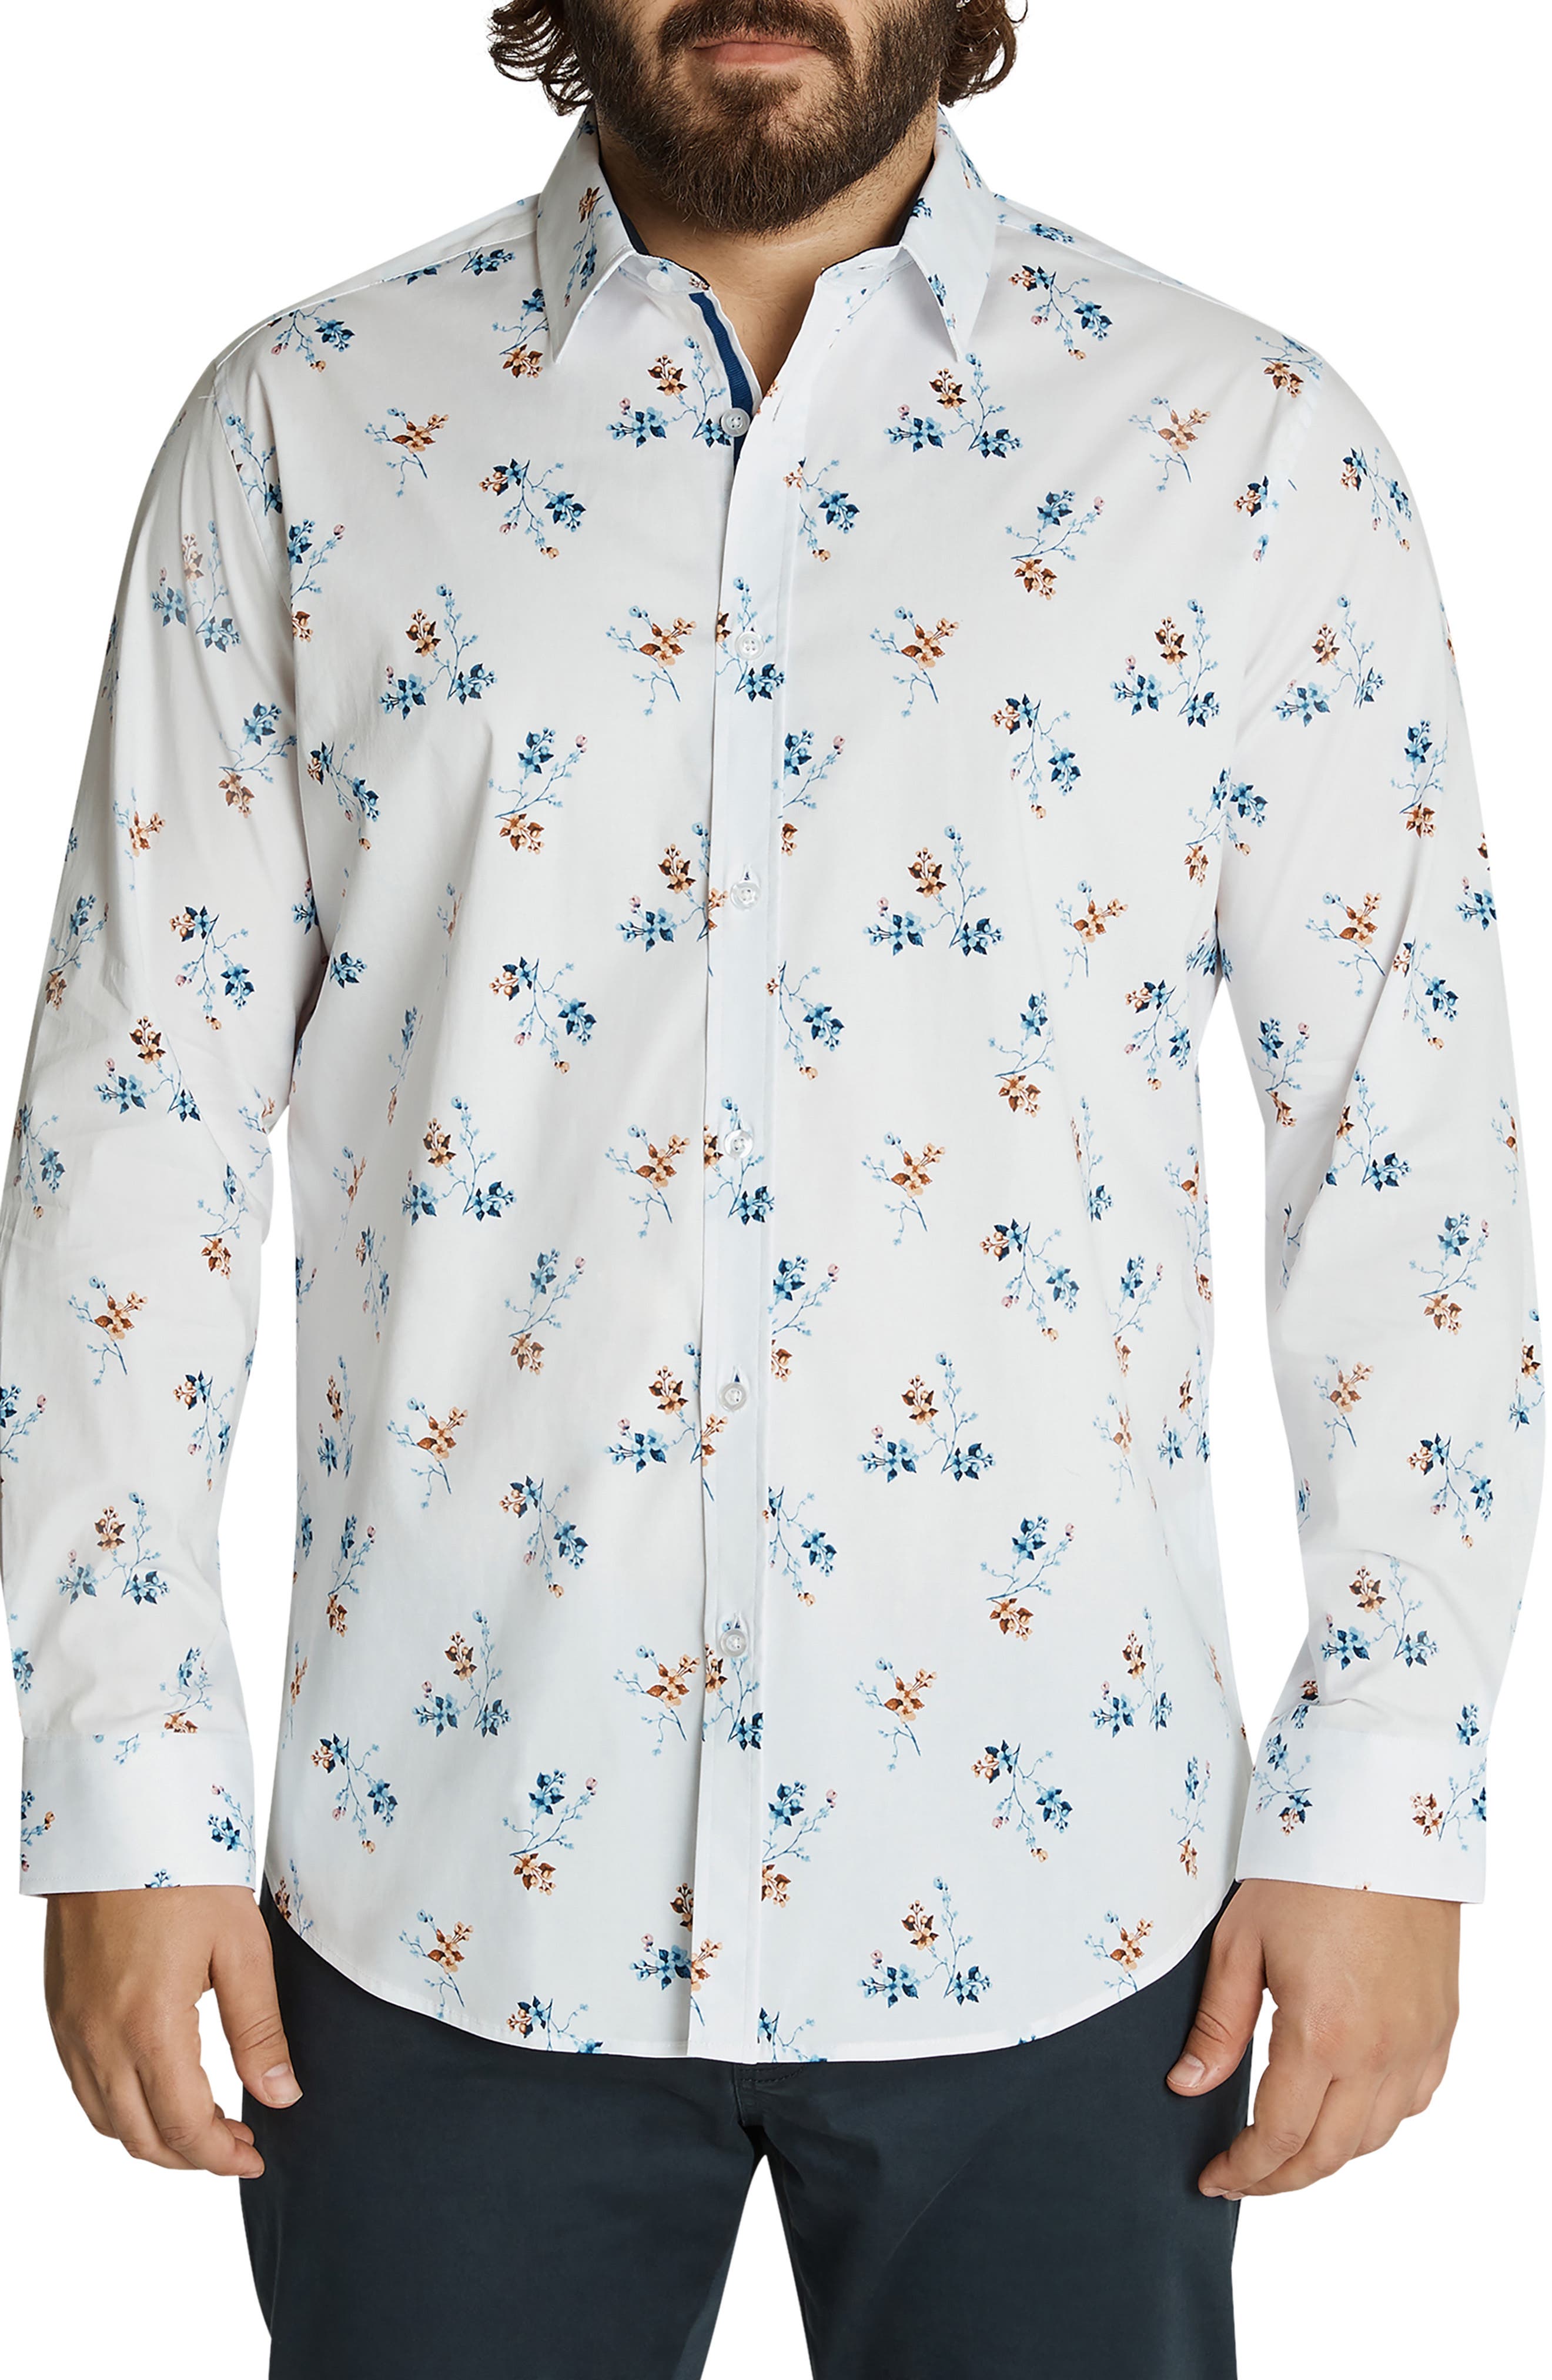 Johnny Bigg Damien Floral Stretch Cotton Button-Up Shirt in White